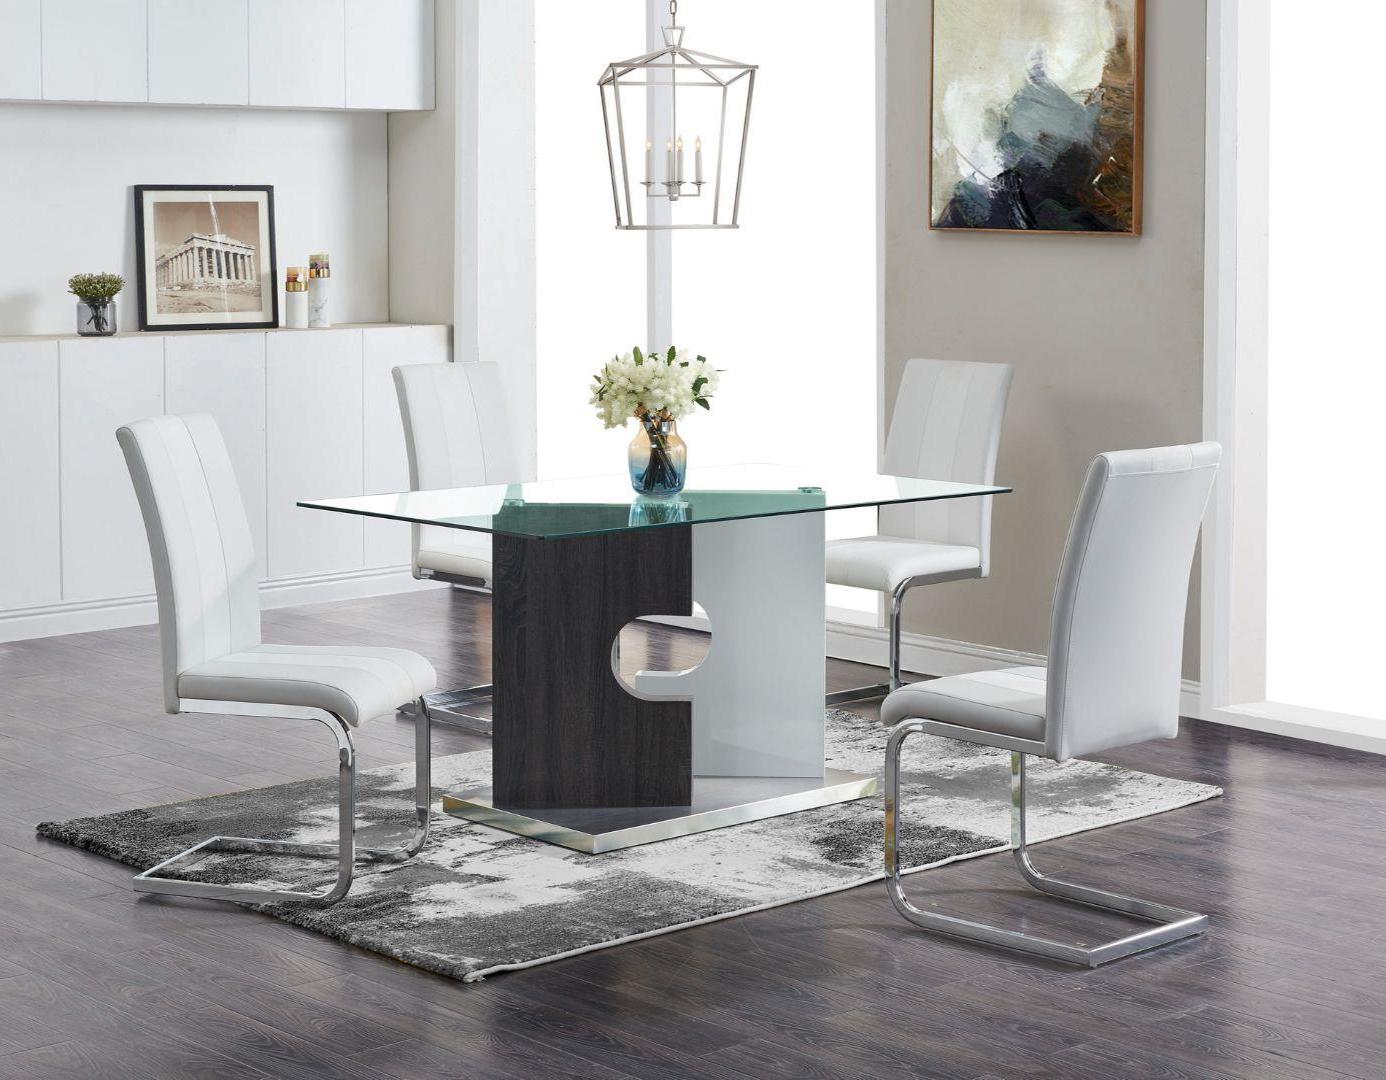 

    
D219DT-GR Lock Style Base Glass Top Dining Table w/ White Chairs Set 5Pcs Global USA
